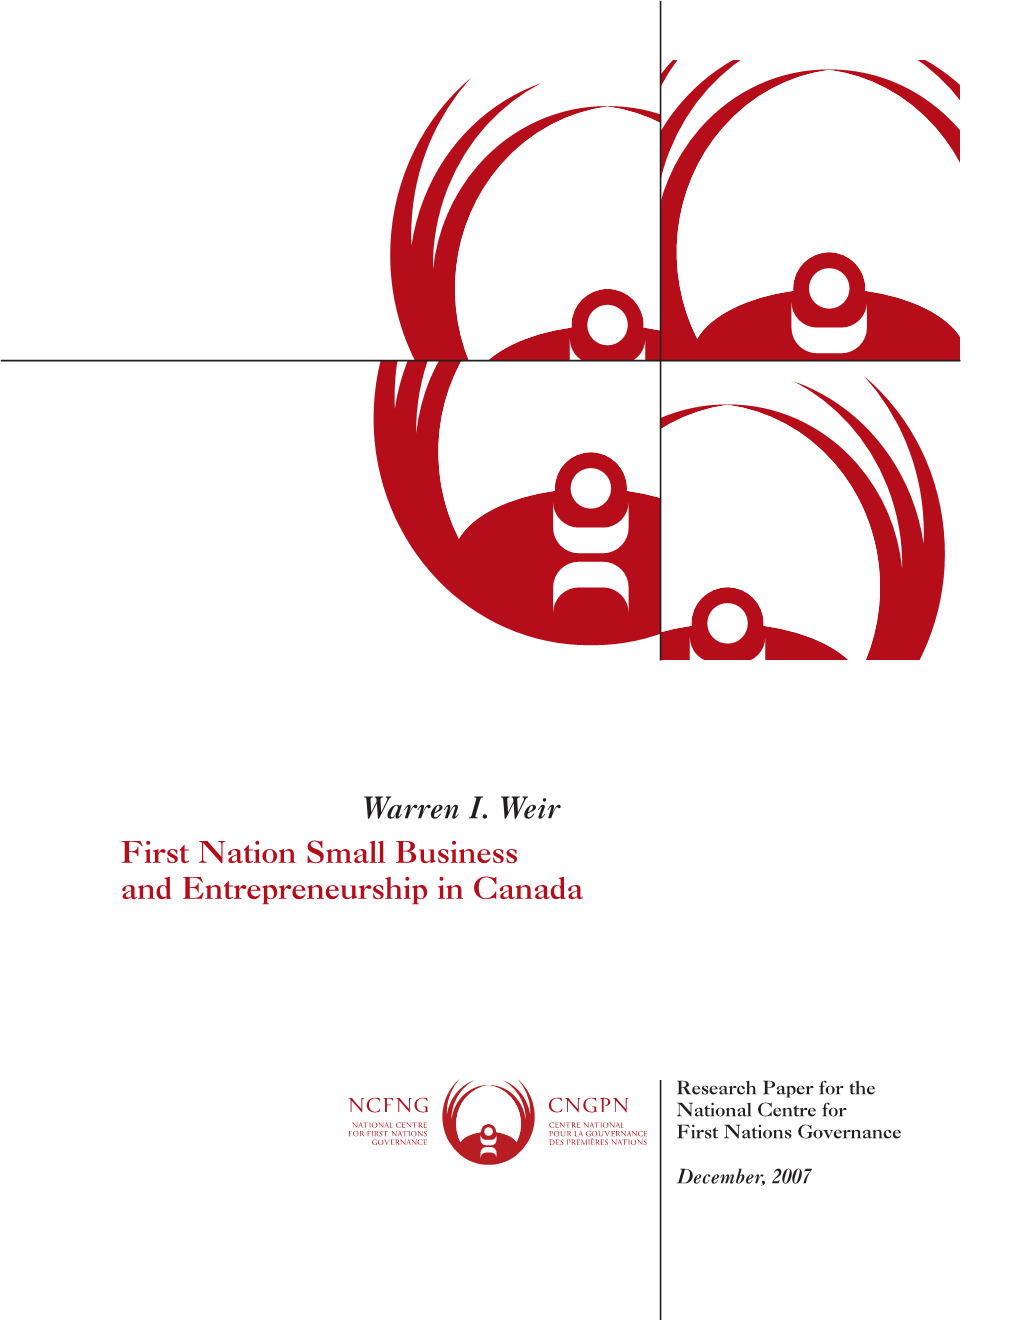 First Nation Small Business and Entrepreneurship in Canada